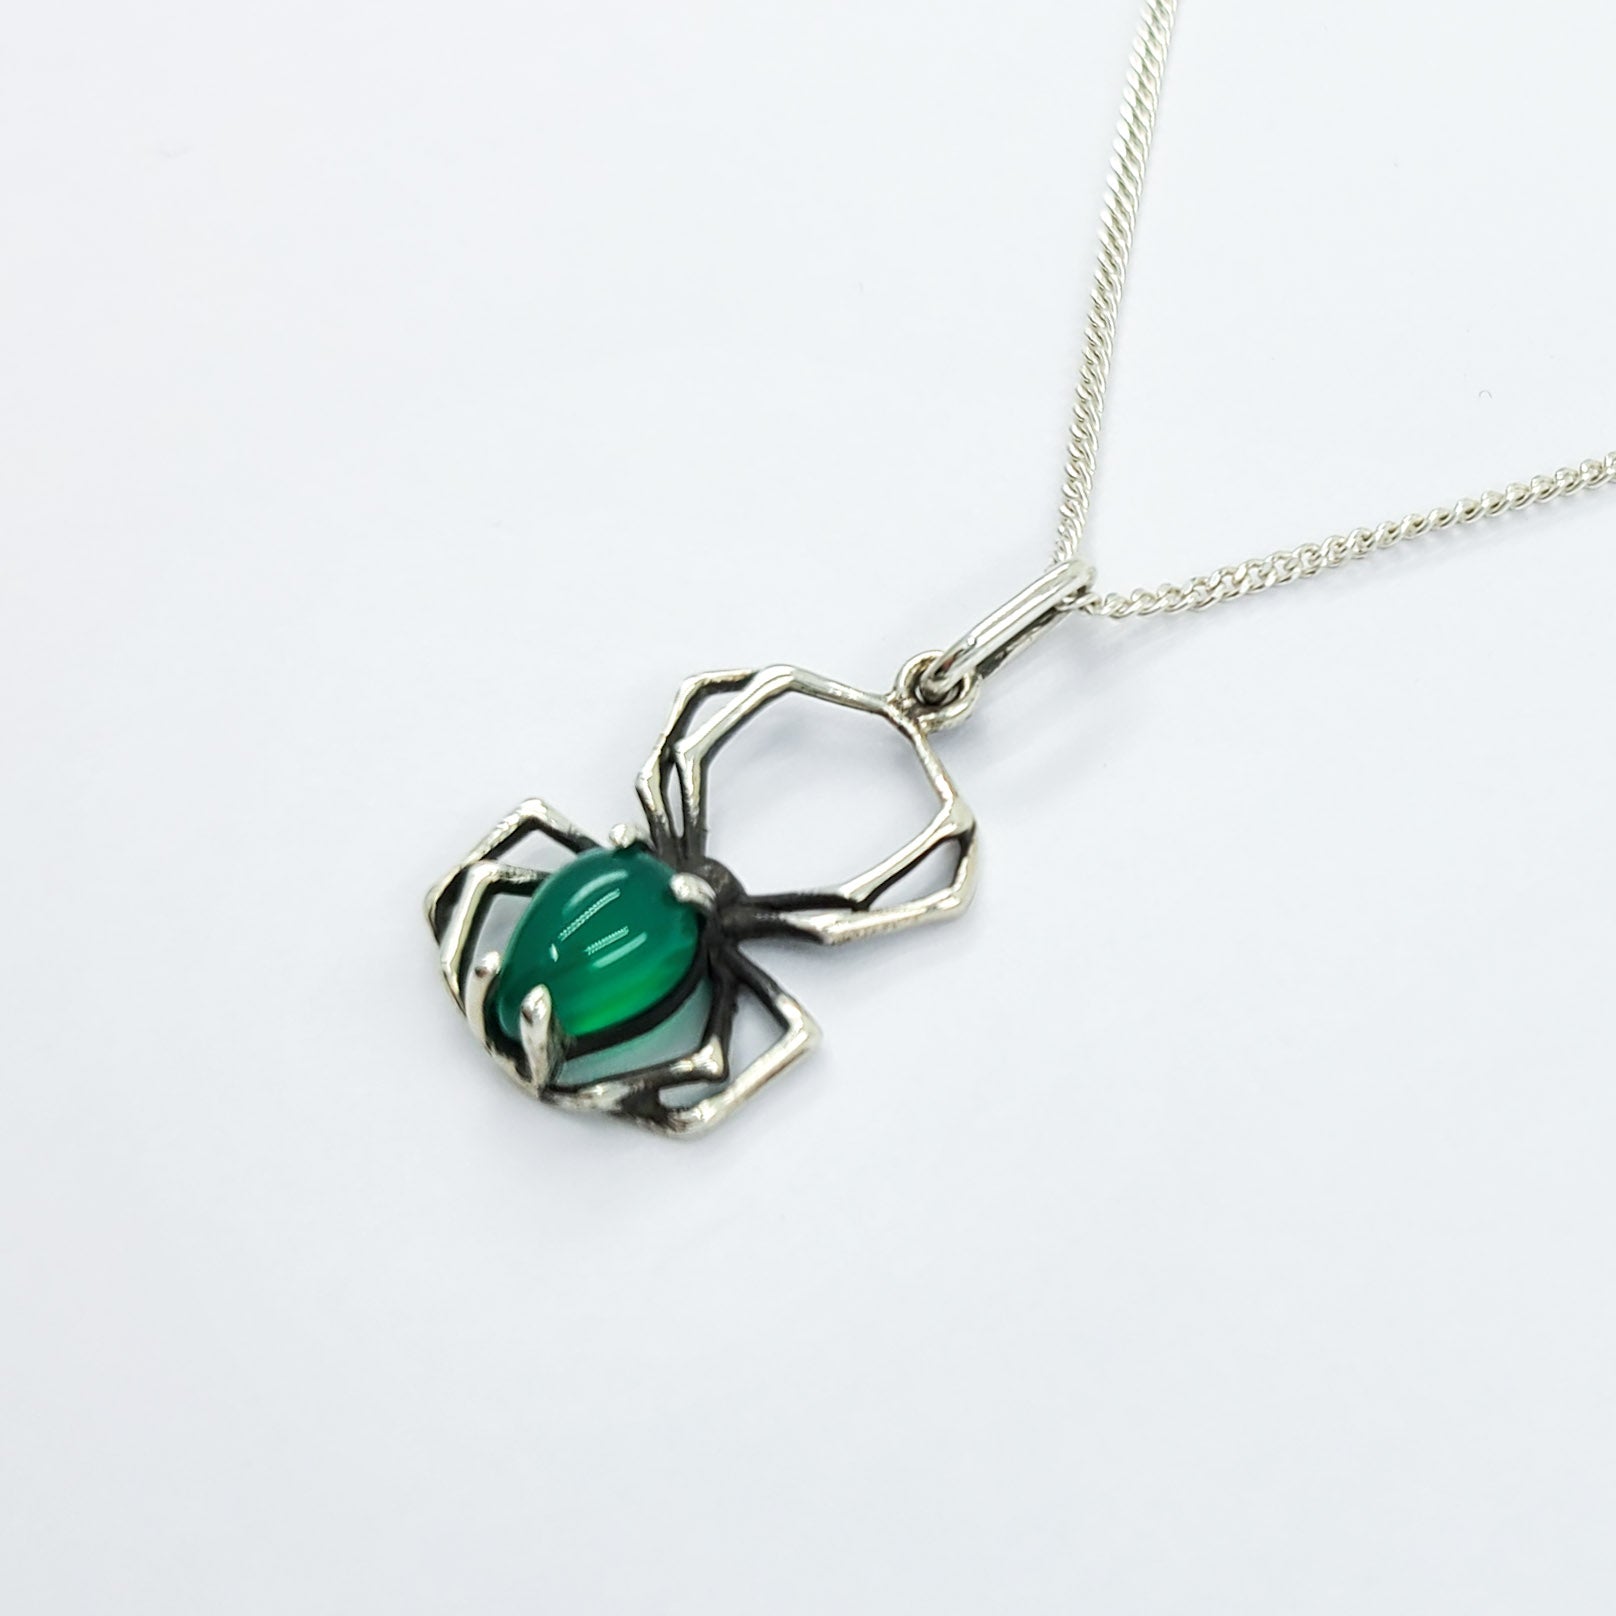 Glowing Green Onyx Spider Pendant